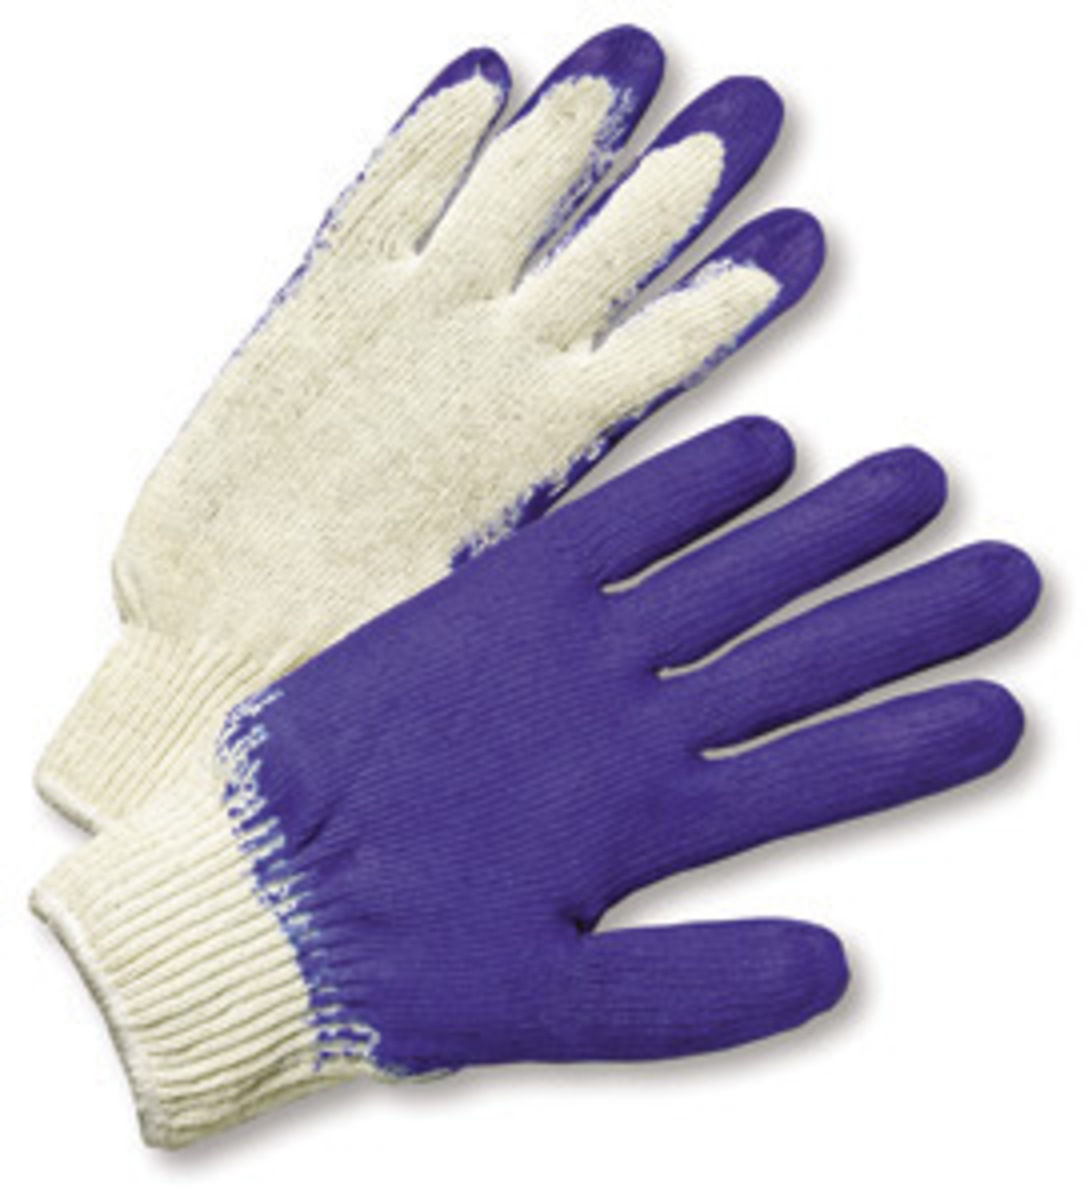 RADNOR® Large 7 Gauge Blue Rubber Palm And Finger Coated Work Gloves With White Cotton And Polyester Liner And Knit Wrist